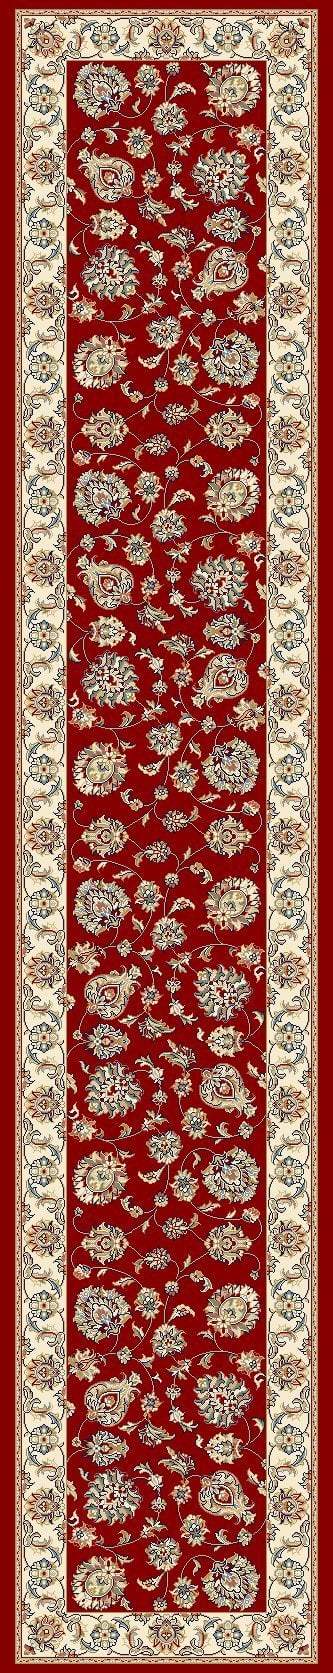 Dynamic Area Rugs 2.2 x 7.7 Ancient Garden Area Rugs 57365-1464 Red 100% Poly Belgium 14 Sizes